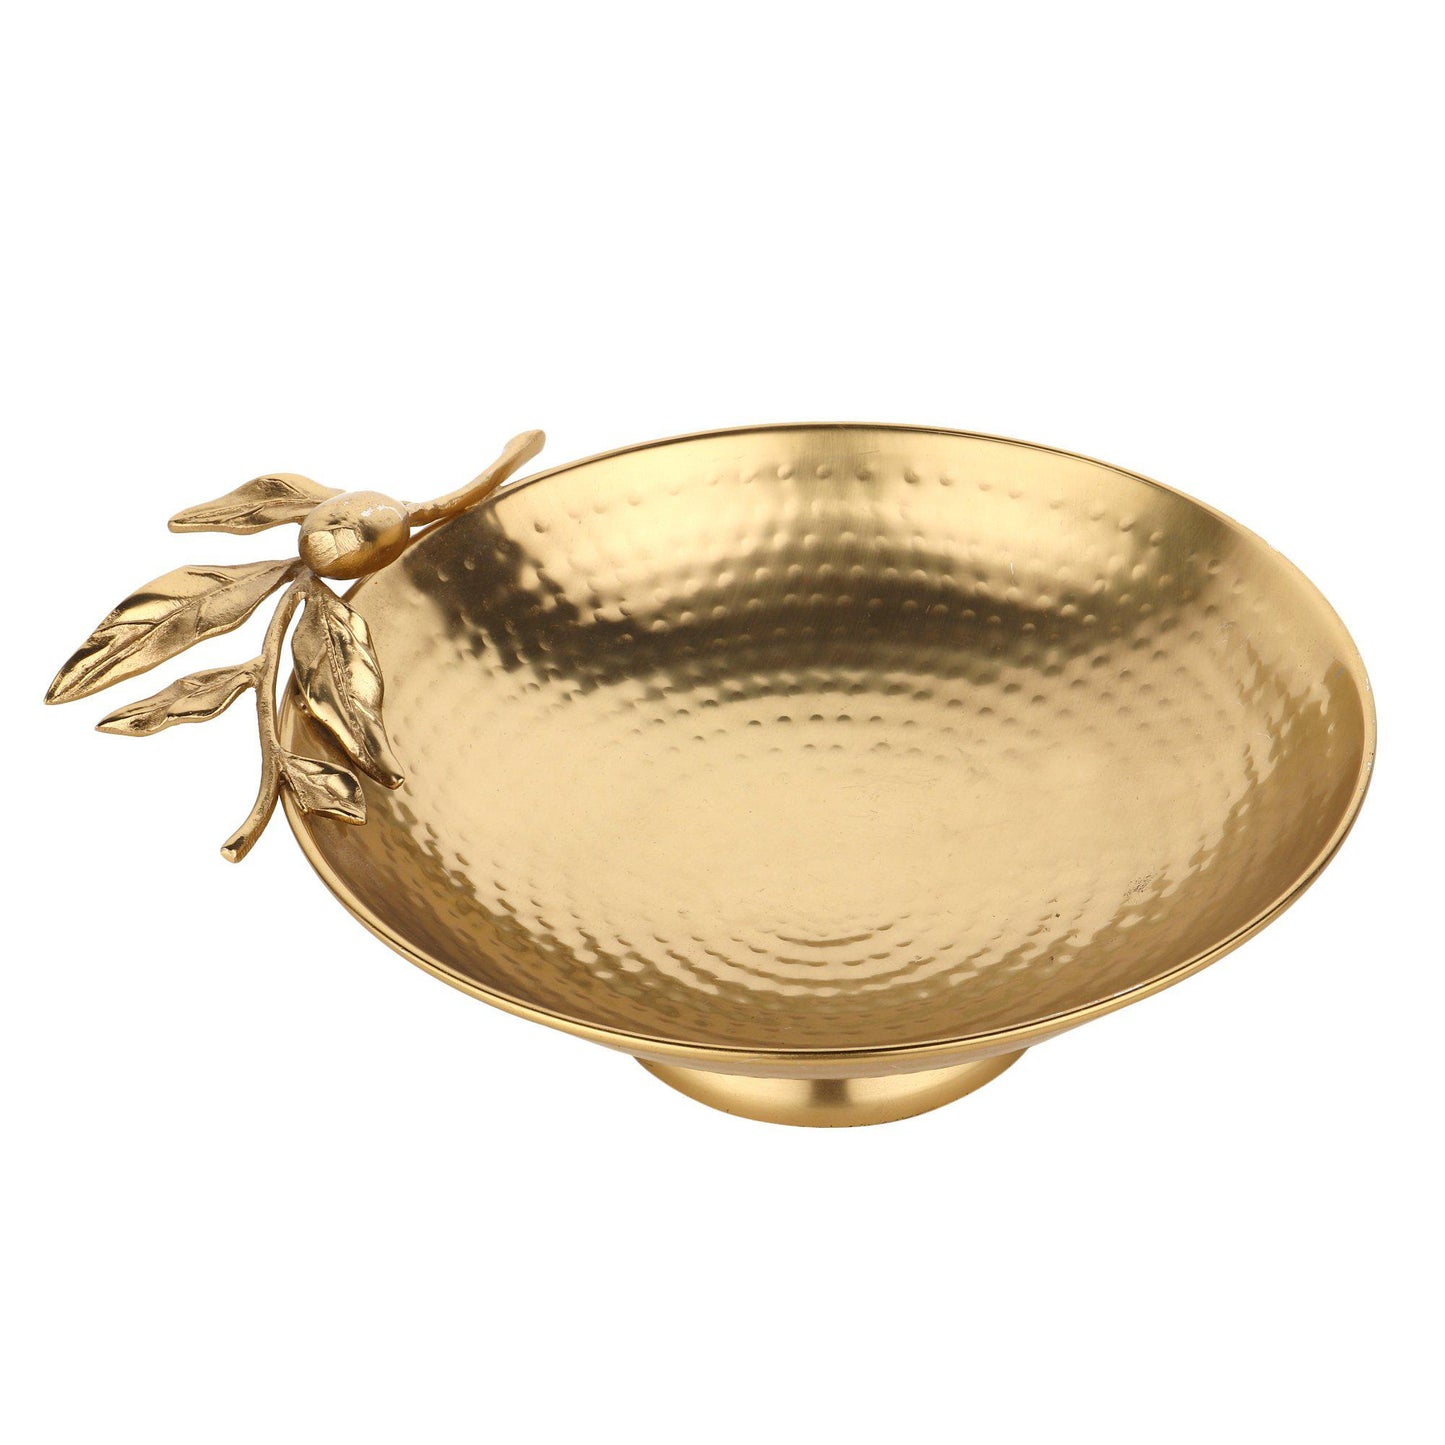 Antique Style Copper Gifting Hamper Plates-Gifting Plates-ONESKYSHOP